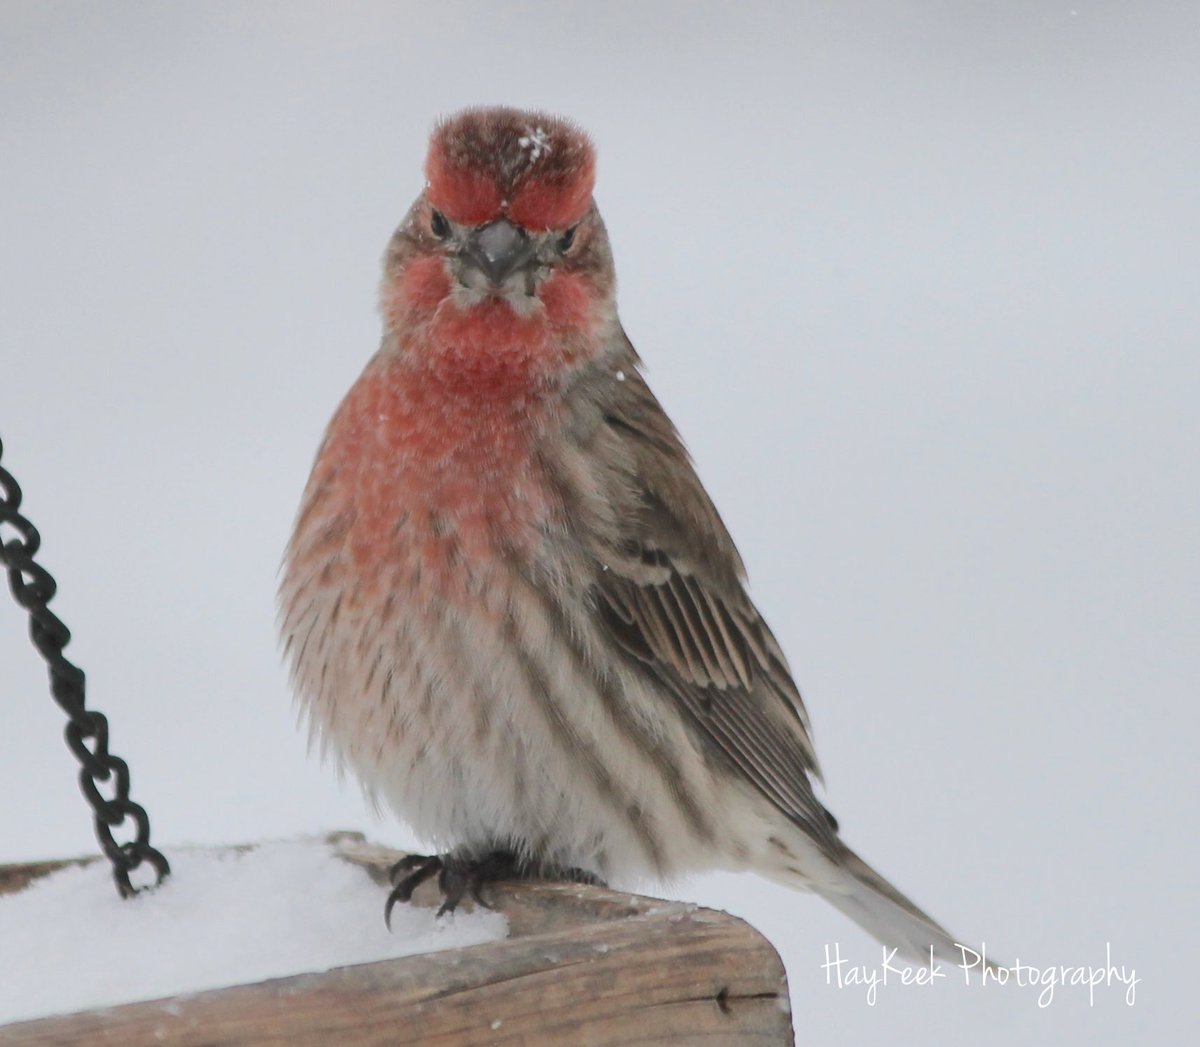 I can’t tell if this #HouseFinch loved or hated the #snow. Any guesses? #Birds #BirdPhotography #BirdWatcher #Nature #HayKeeksYard #HayKeekPhotography #AtokaTN #Tennessee